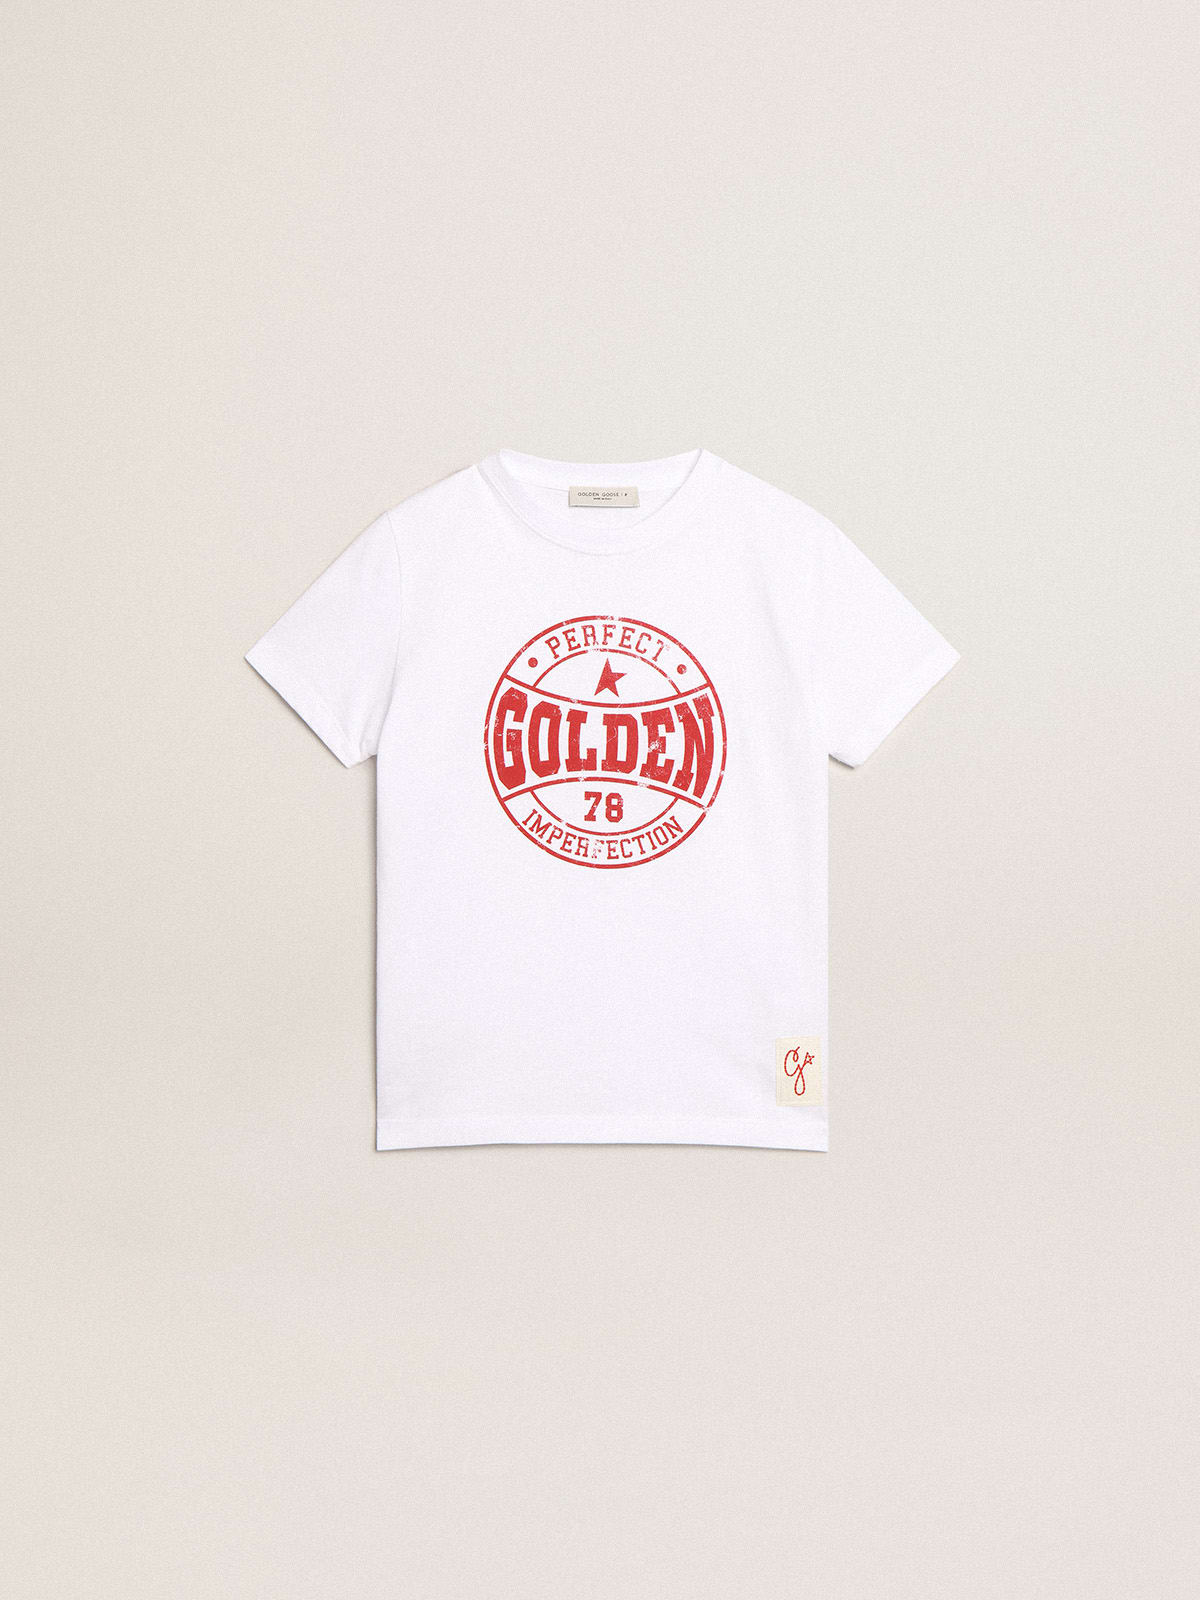 Boys' white T-shirt with printed red logo in the center